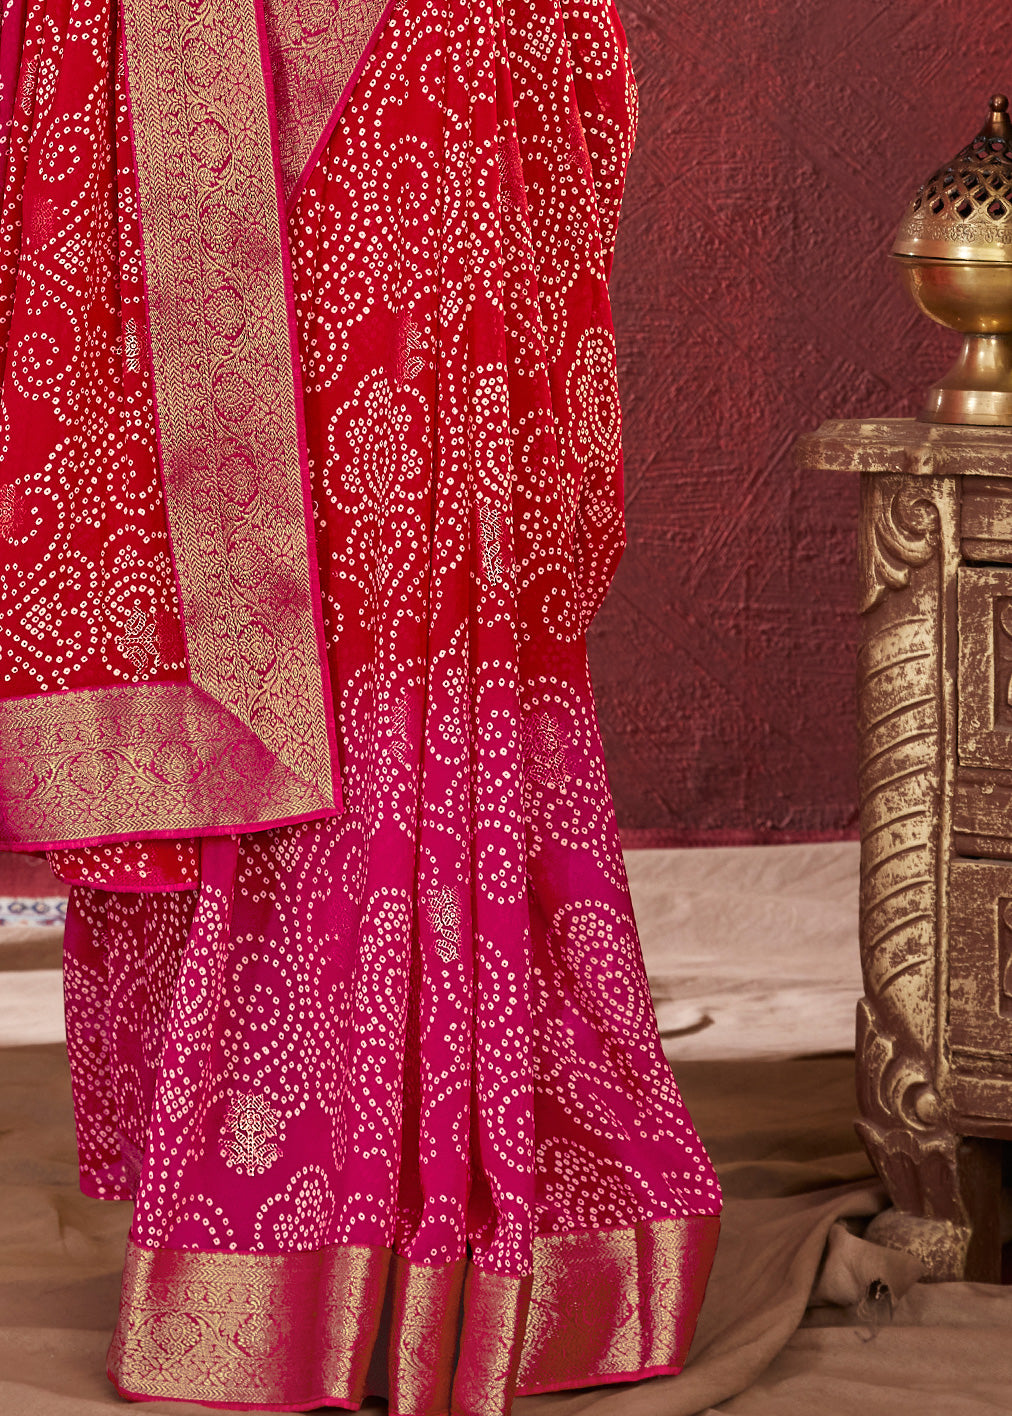 Dual Shades Bandhani Printed Red Pink Weightless Georgette Saree With Embroidery Lace